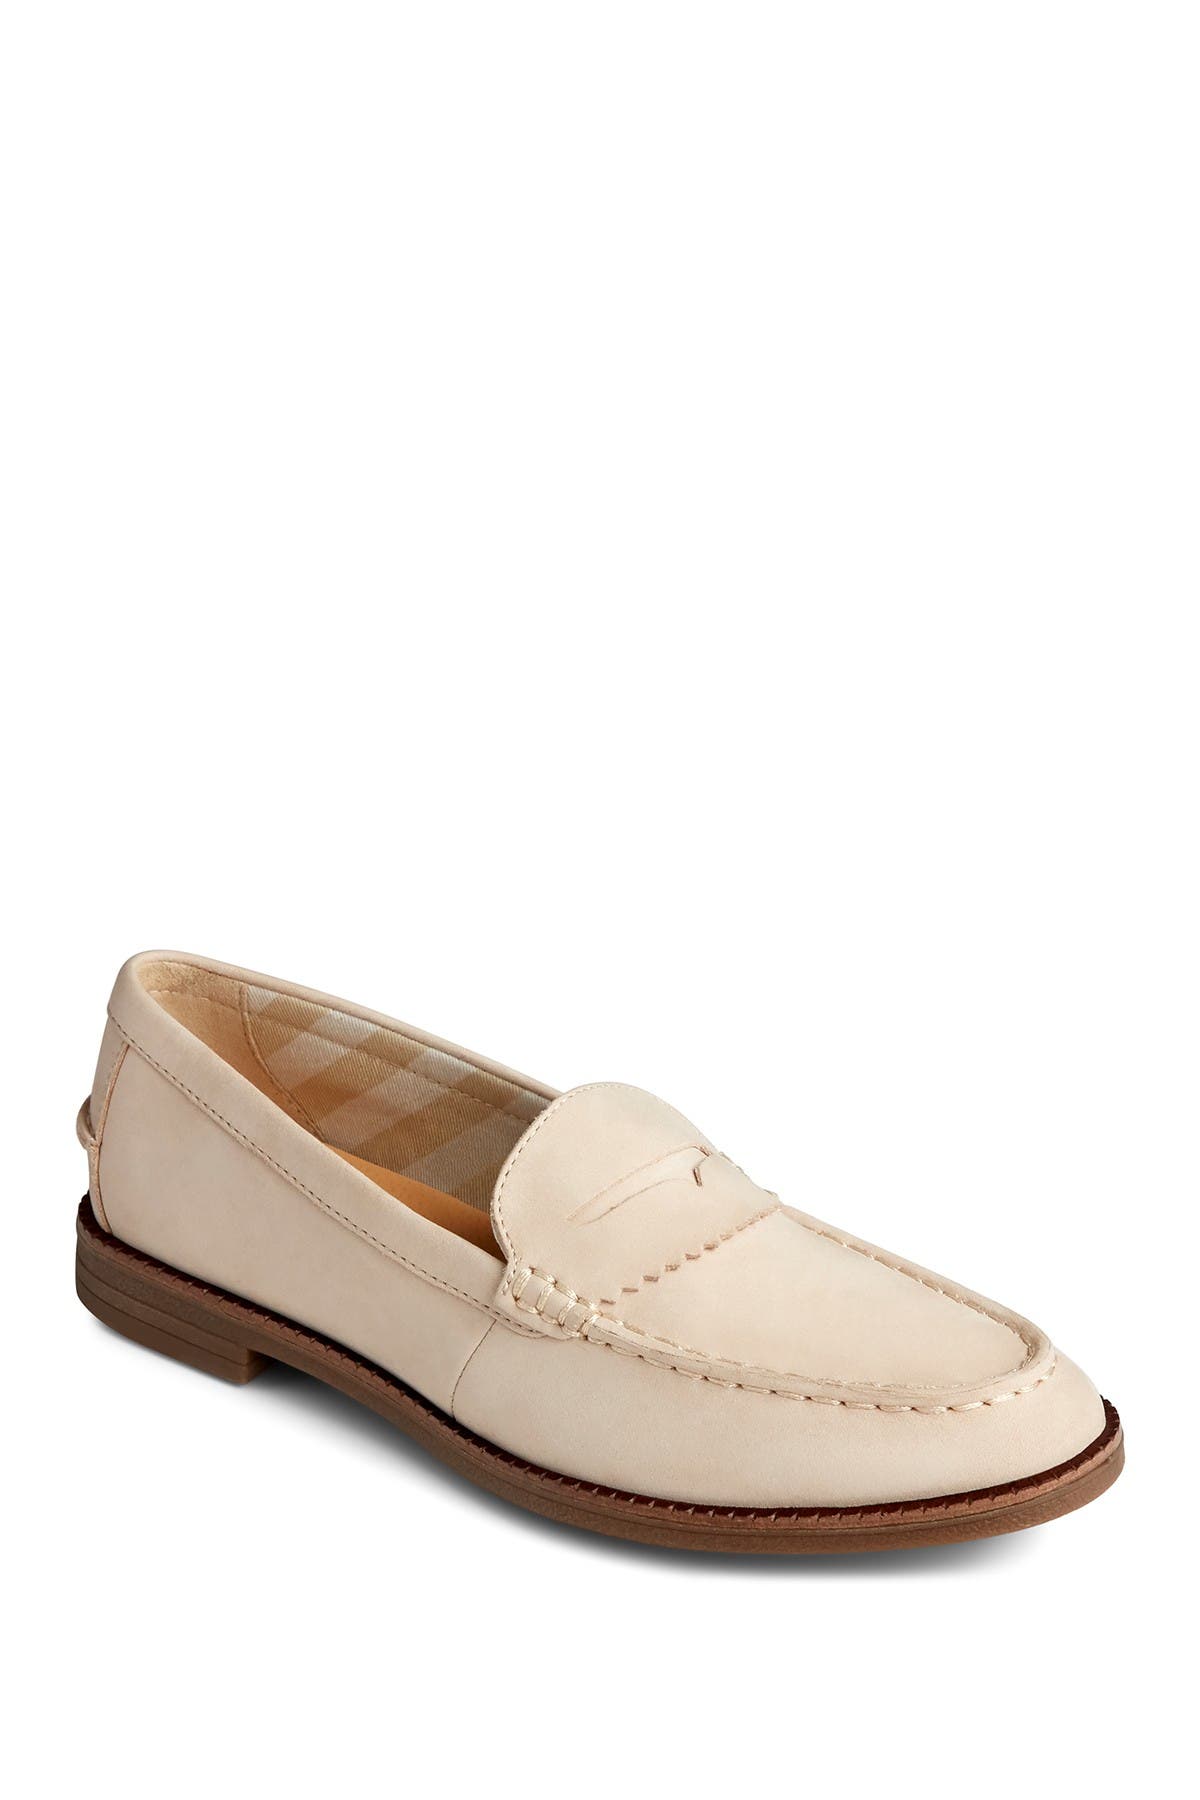 sperry women's shoes nordstrom